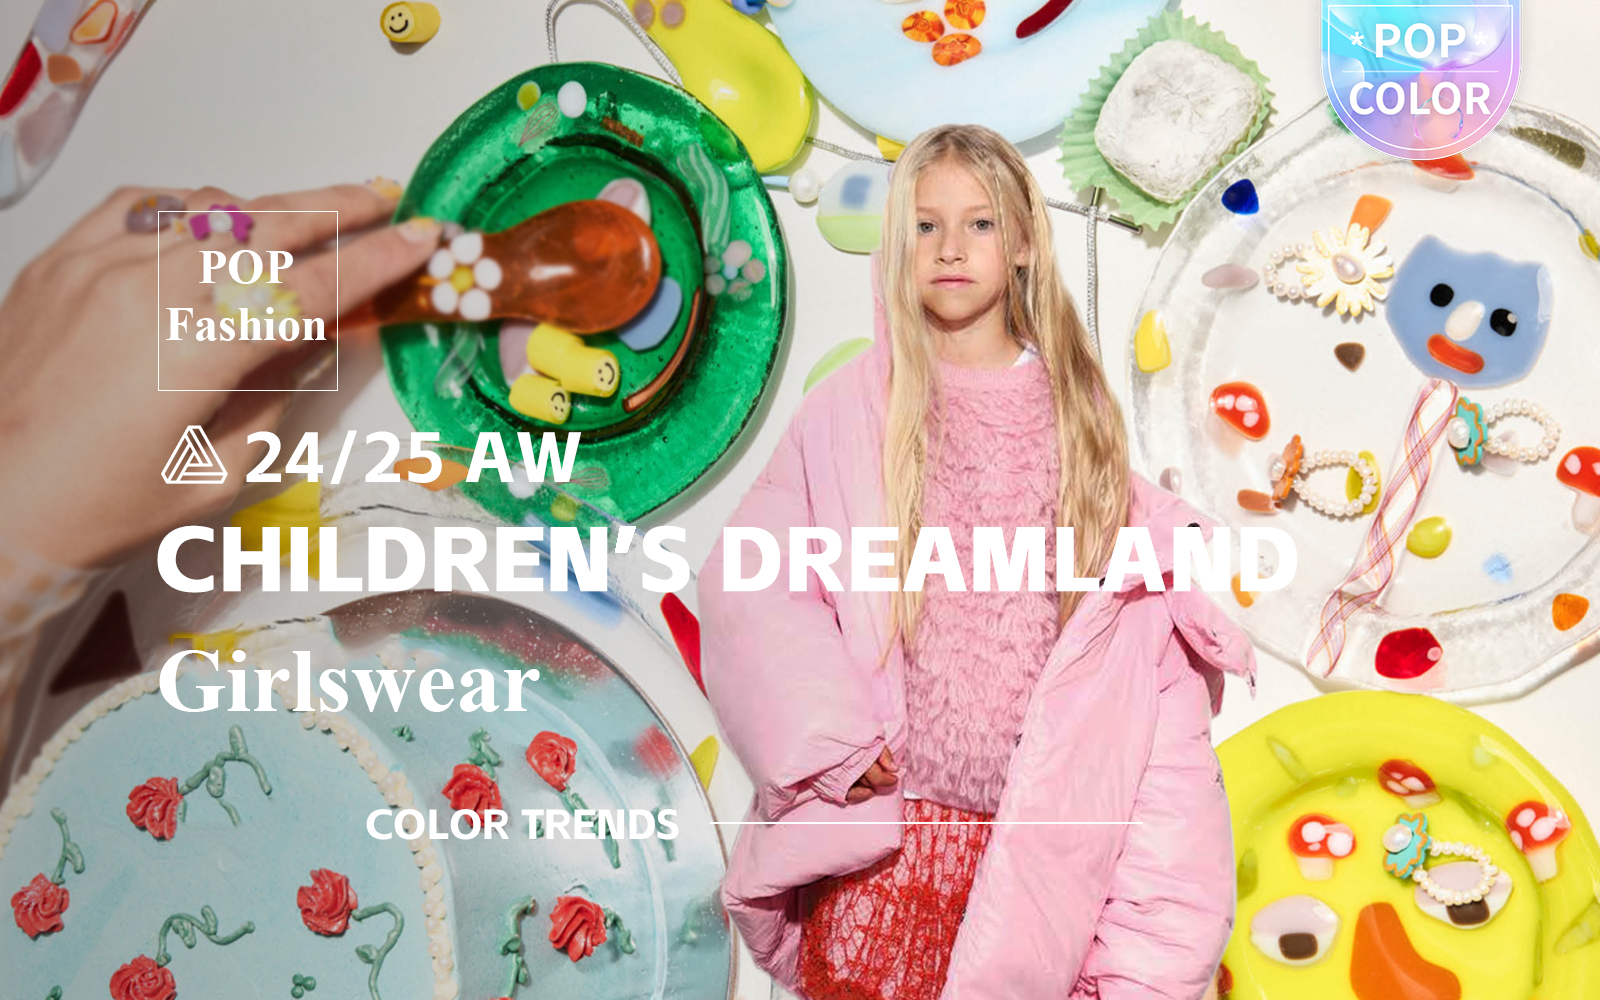 Children's Dreamland -- The A/W 24/25 Color Trend for Girlswear